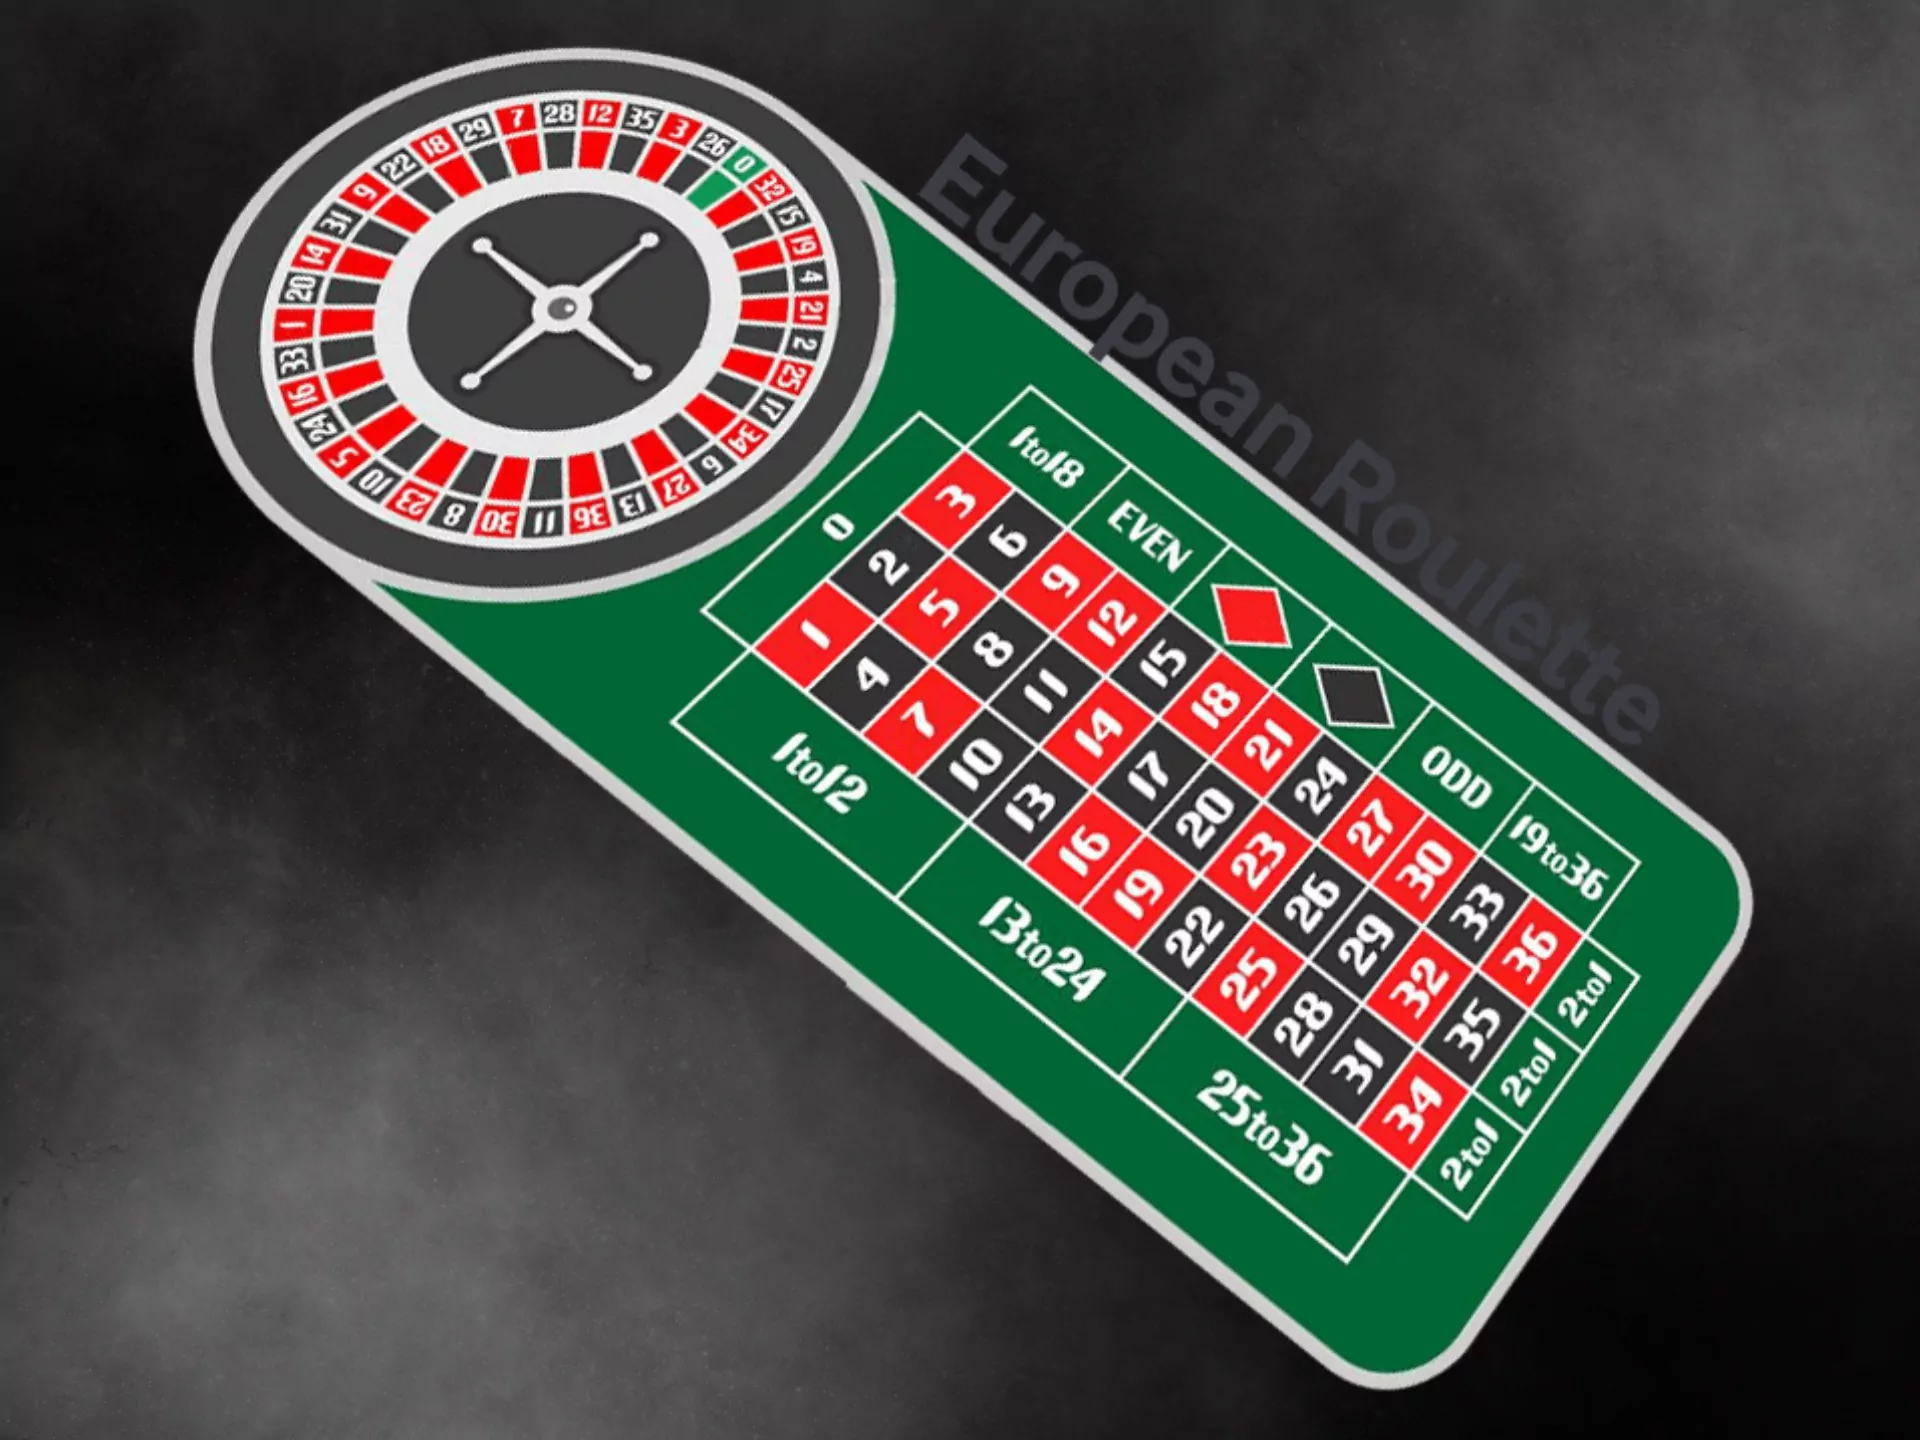 Play European roulette if you want a classical and well-known game.